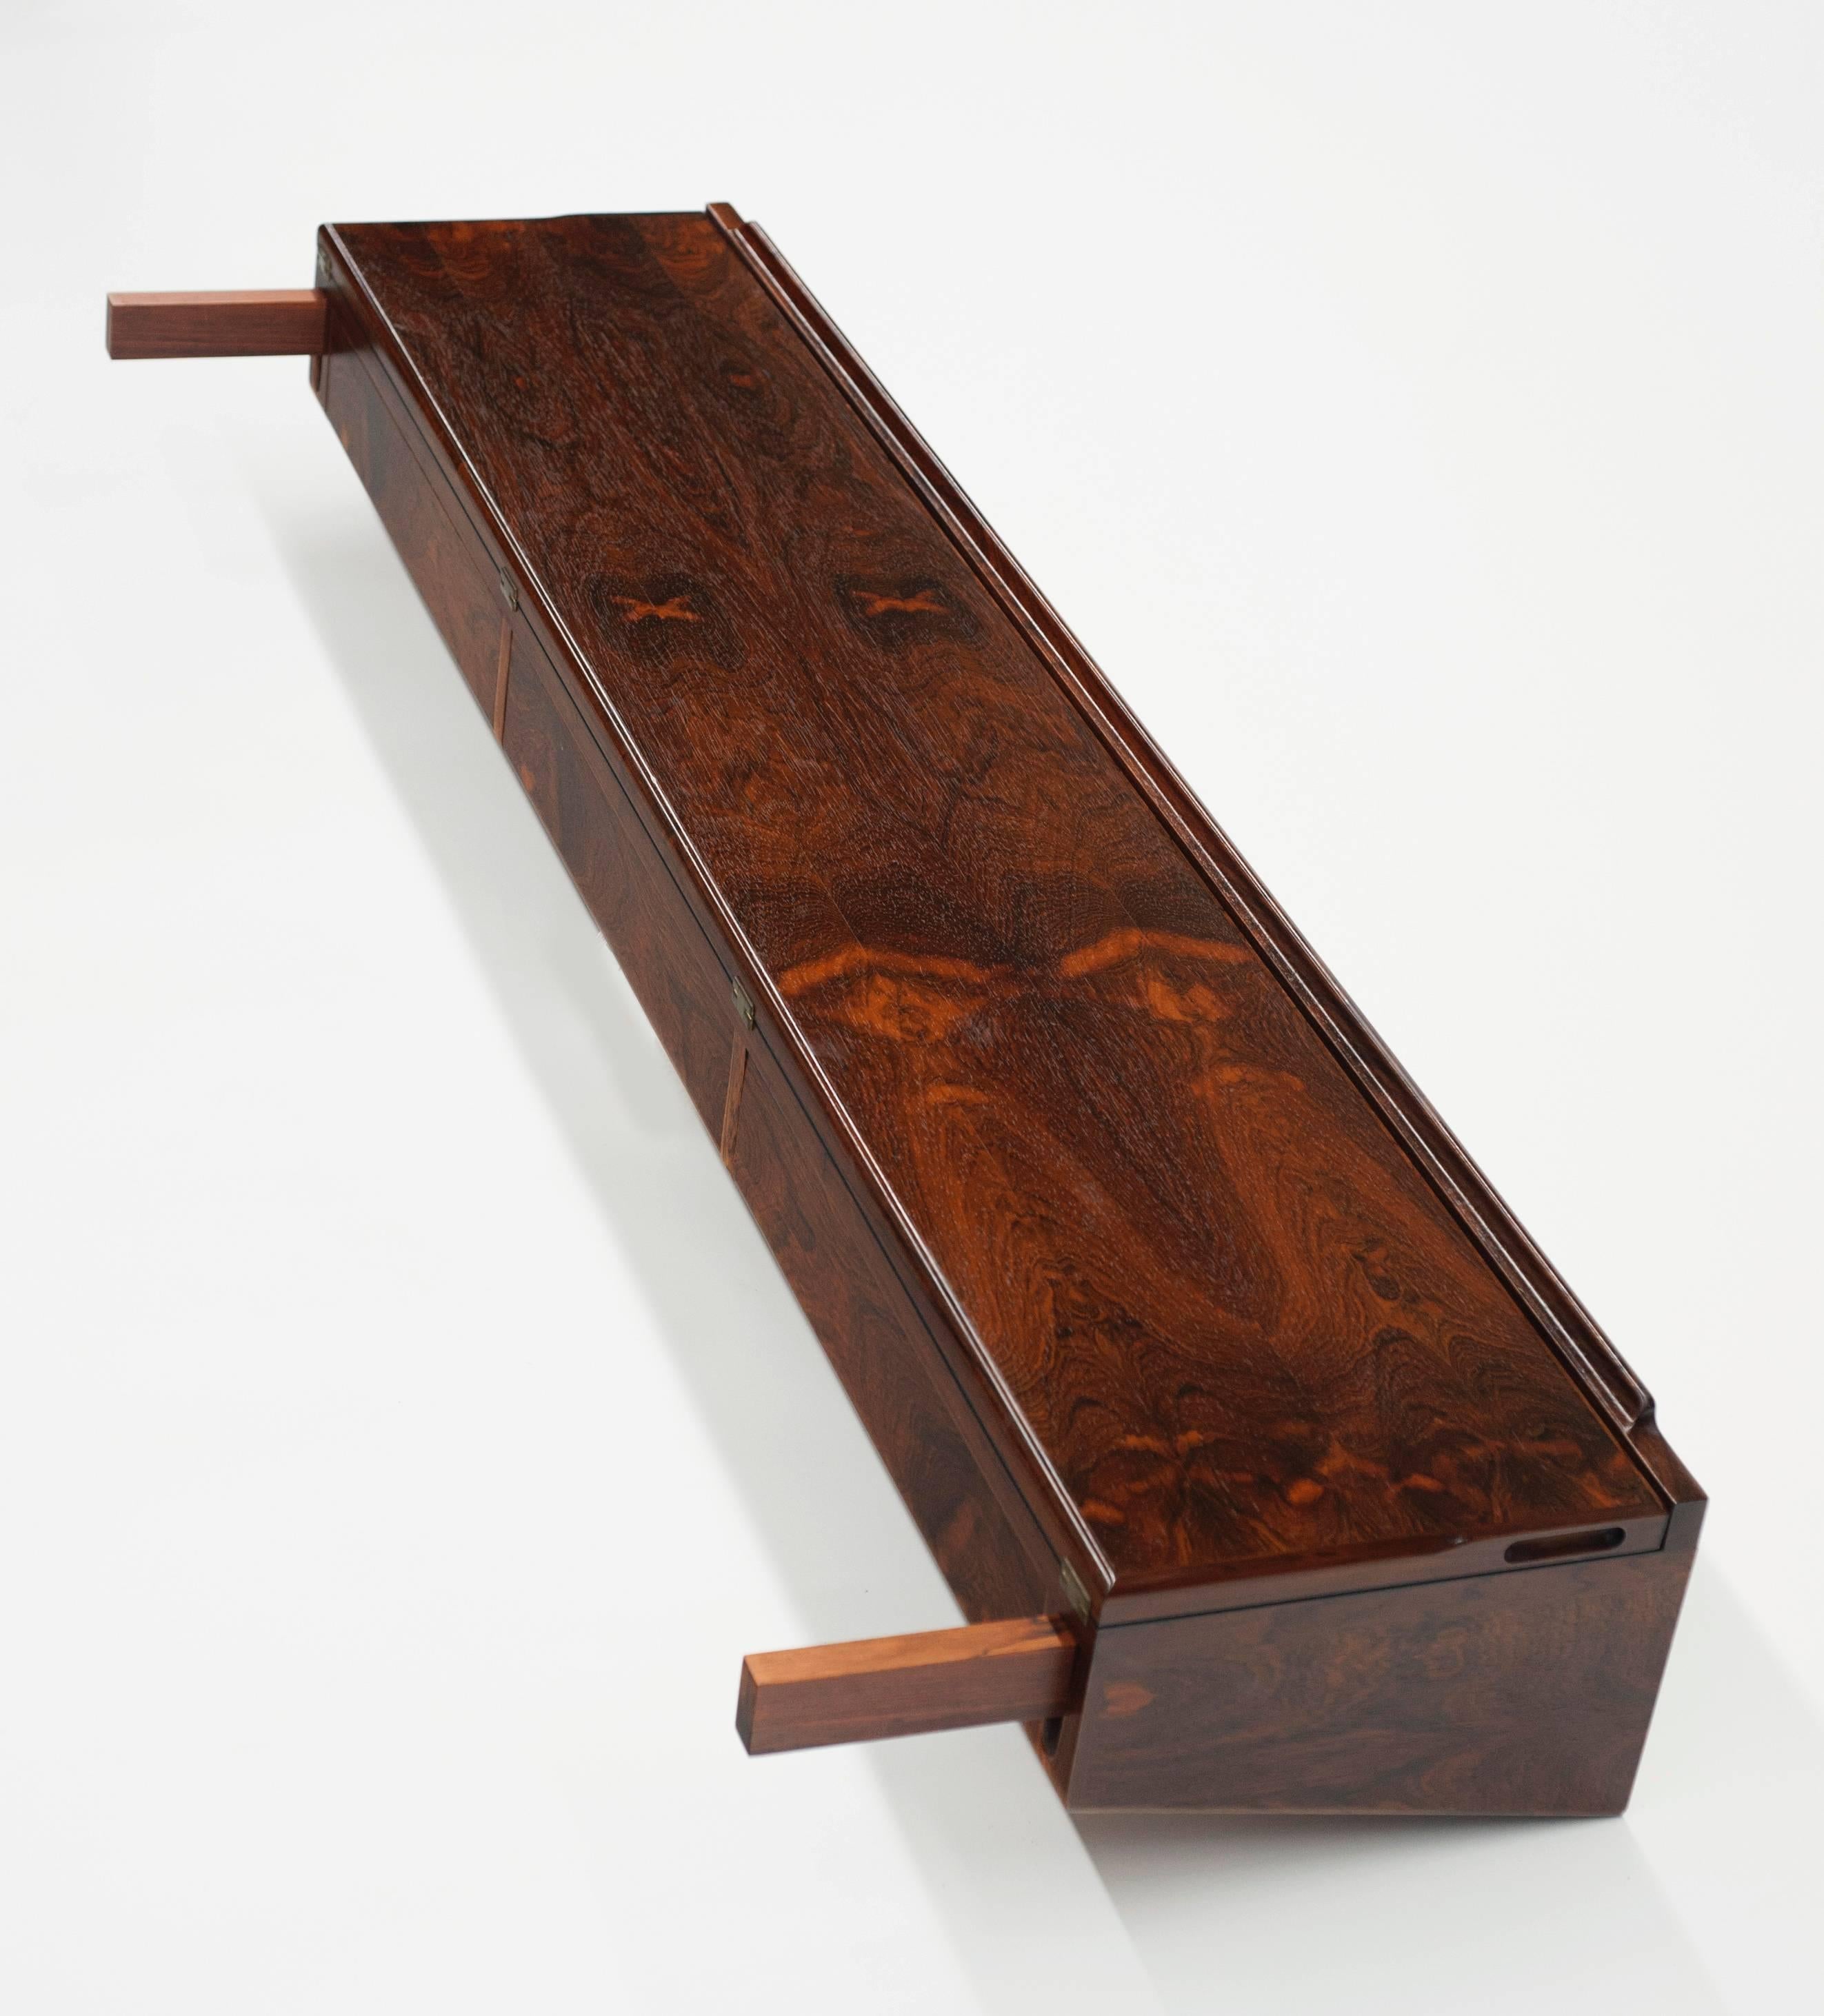 Danish Modern Rosewood Wall-Mounted Console by Arne Hovmand-Olsen